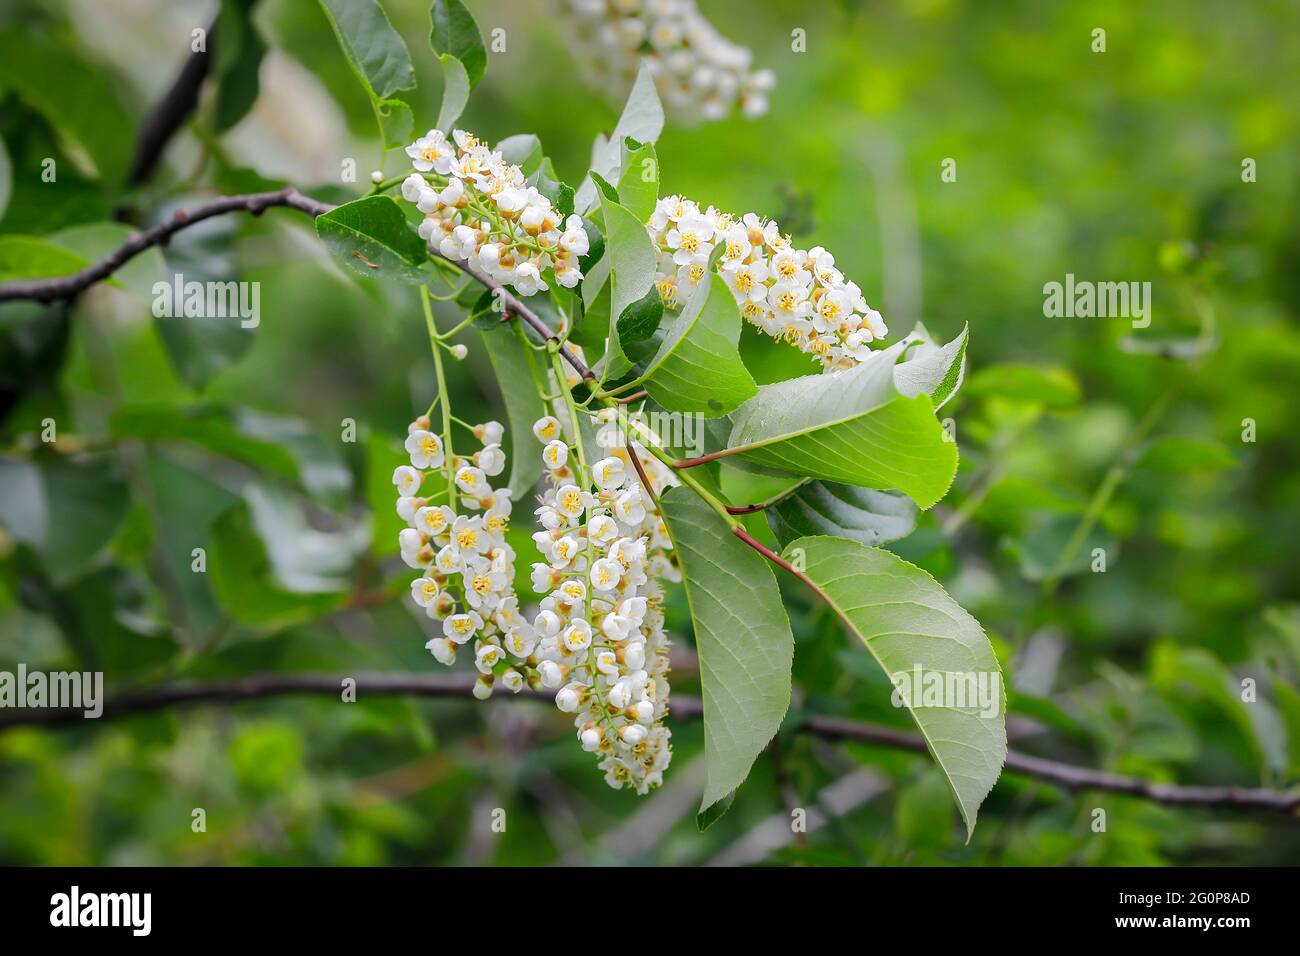 A close up of a cluster of small white flowers on a tree in Coeur d ...